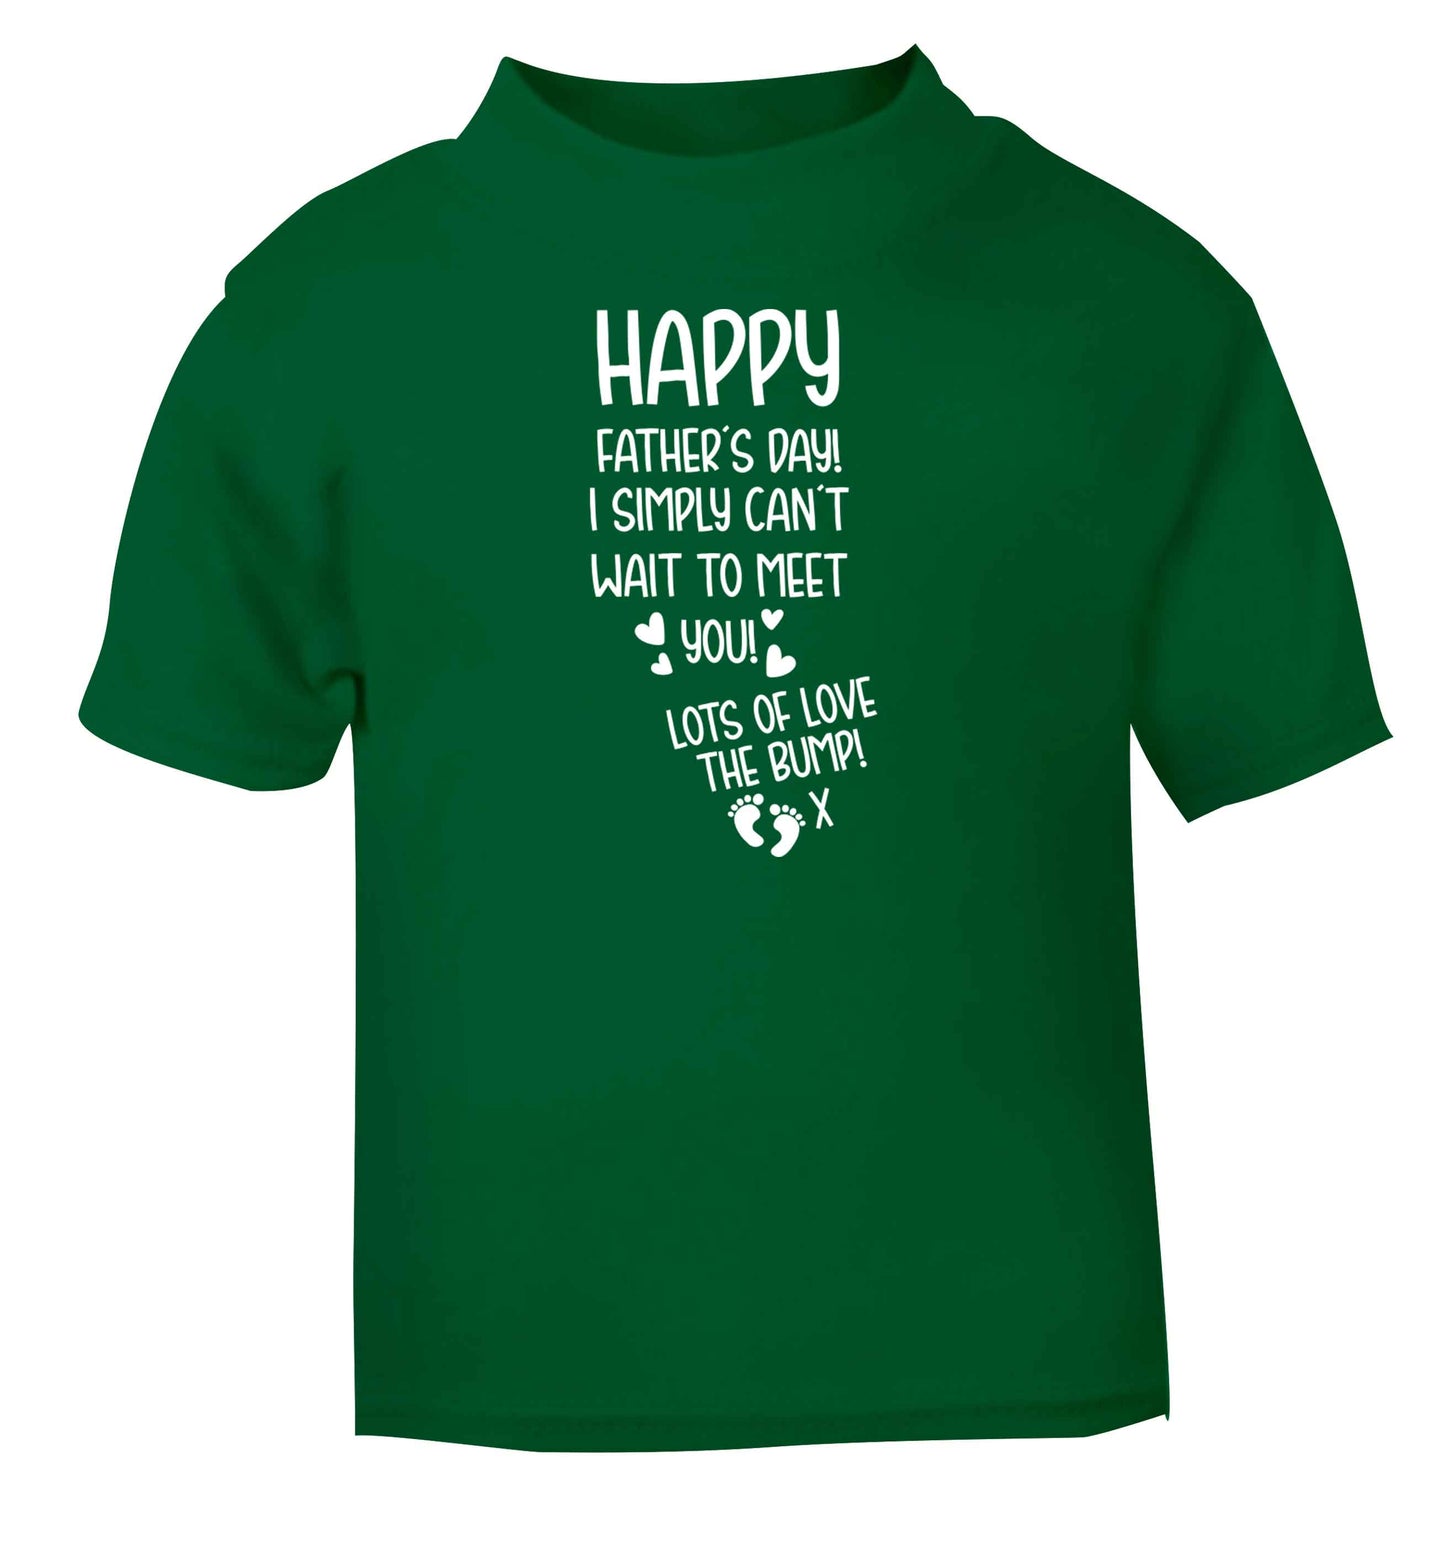 Happy Father's day daddy I can't wait to meet you lot's of love the bump! green baby toddler Tshirt 2 Years